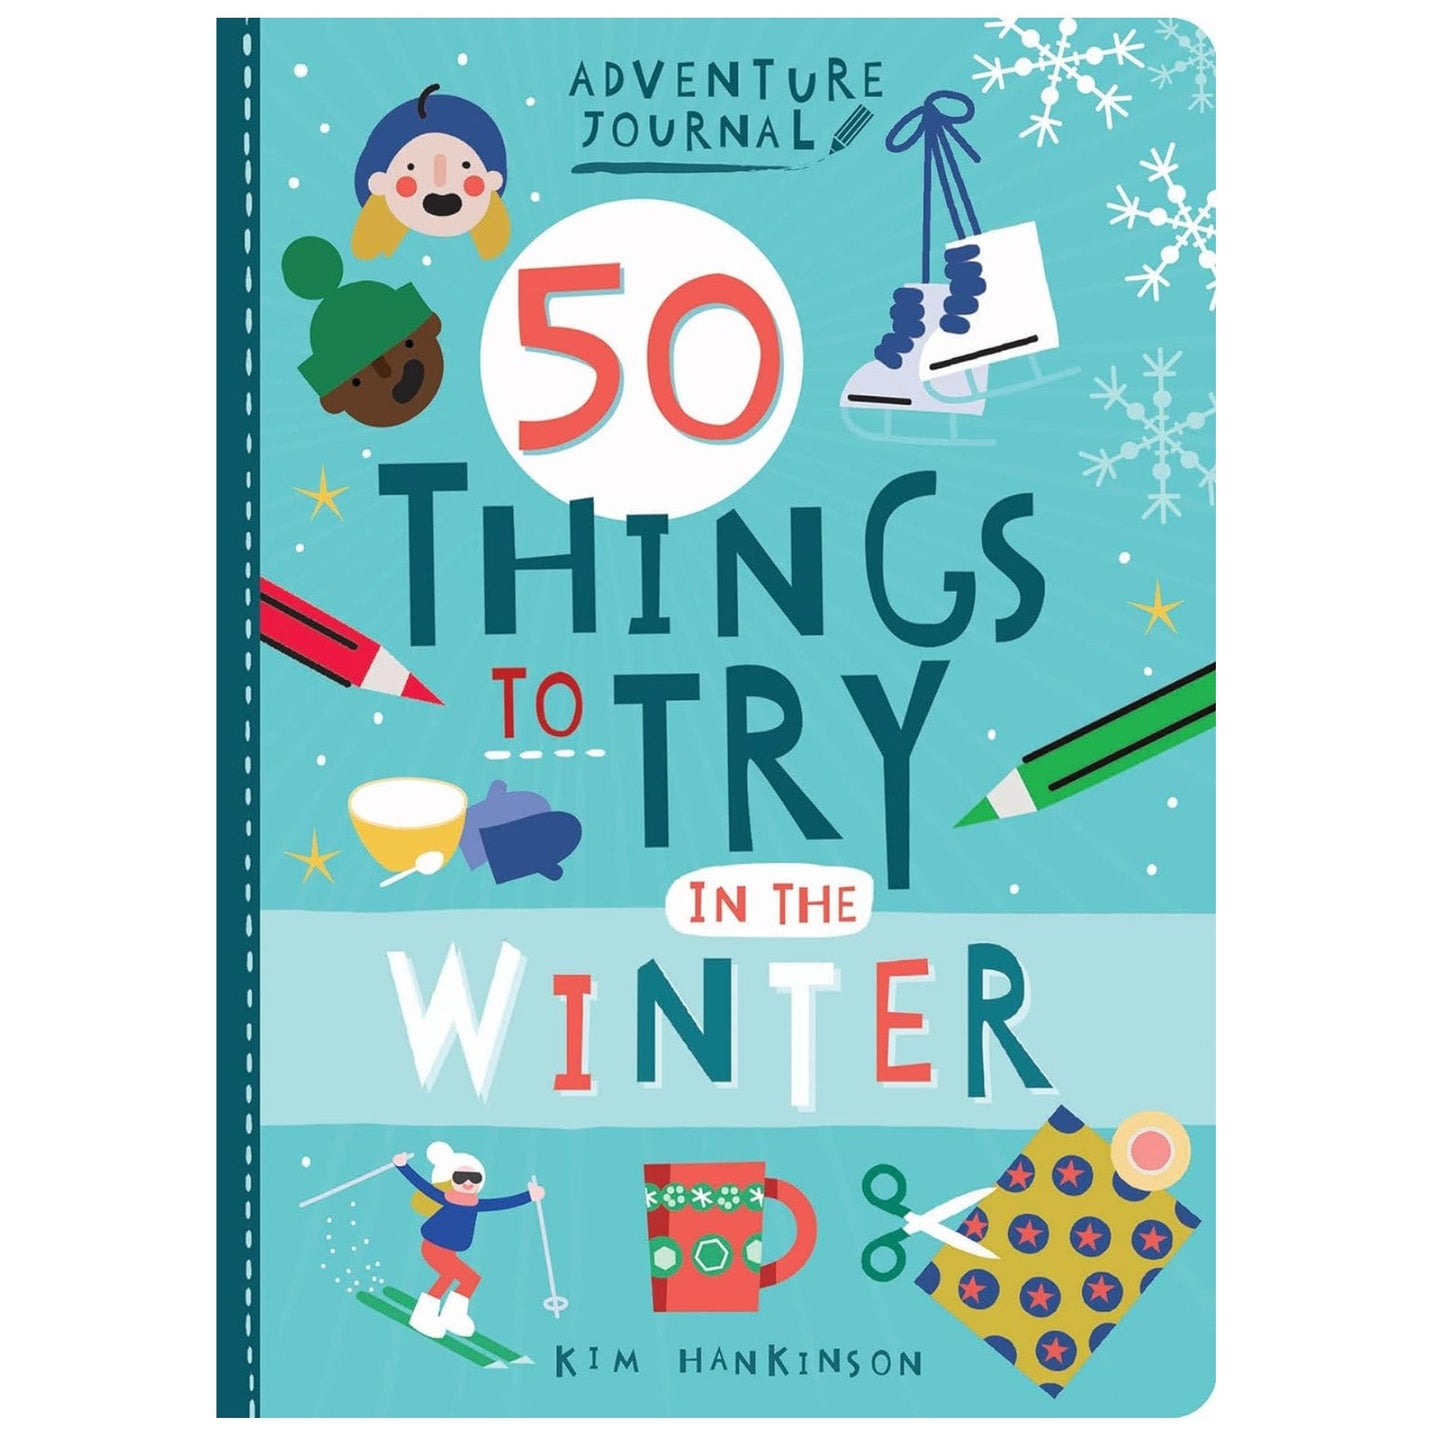 adventure journal 50 things to try in the winter